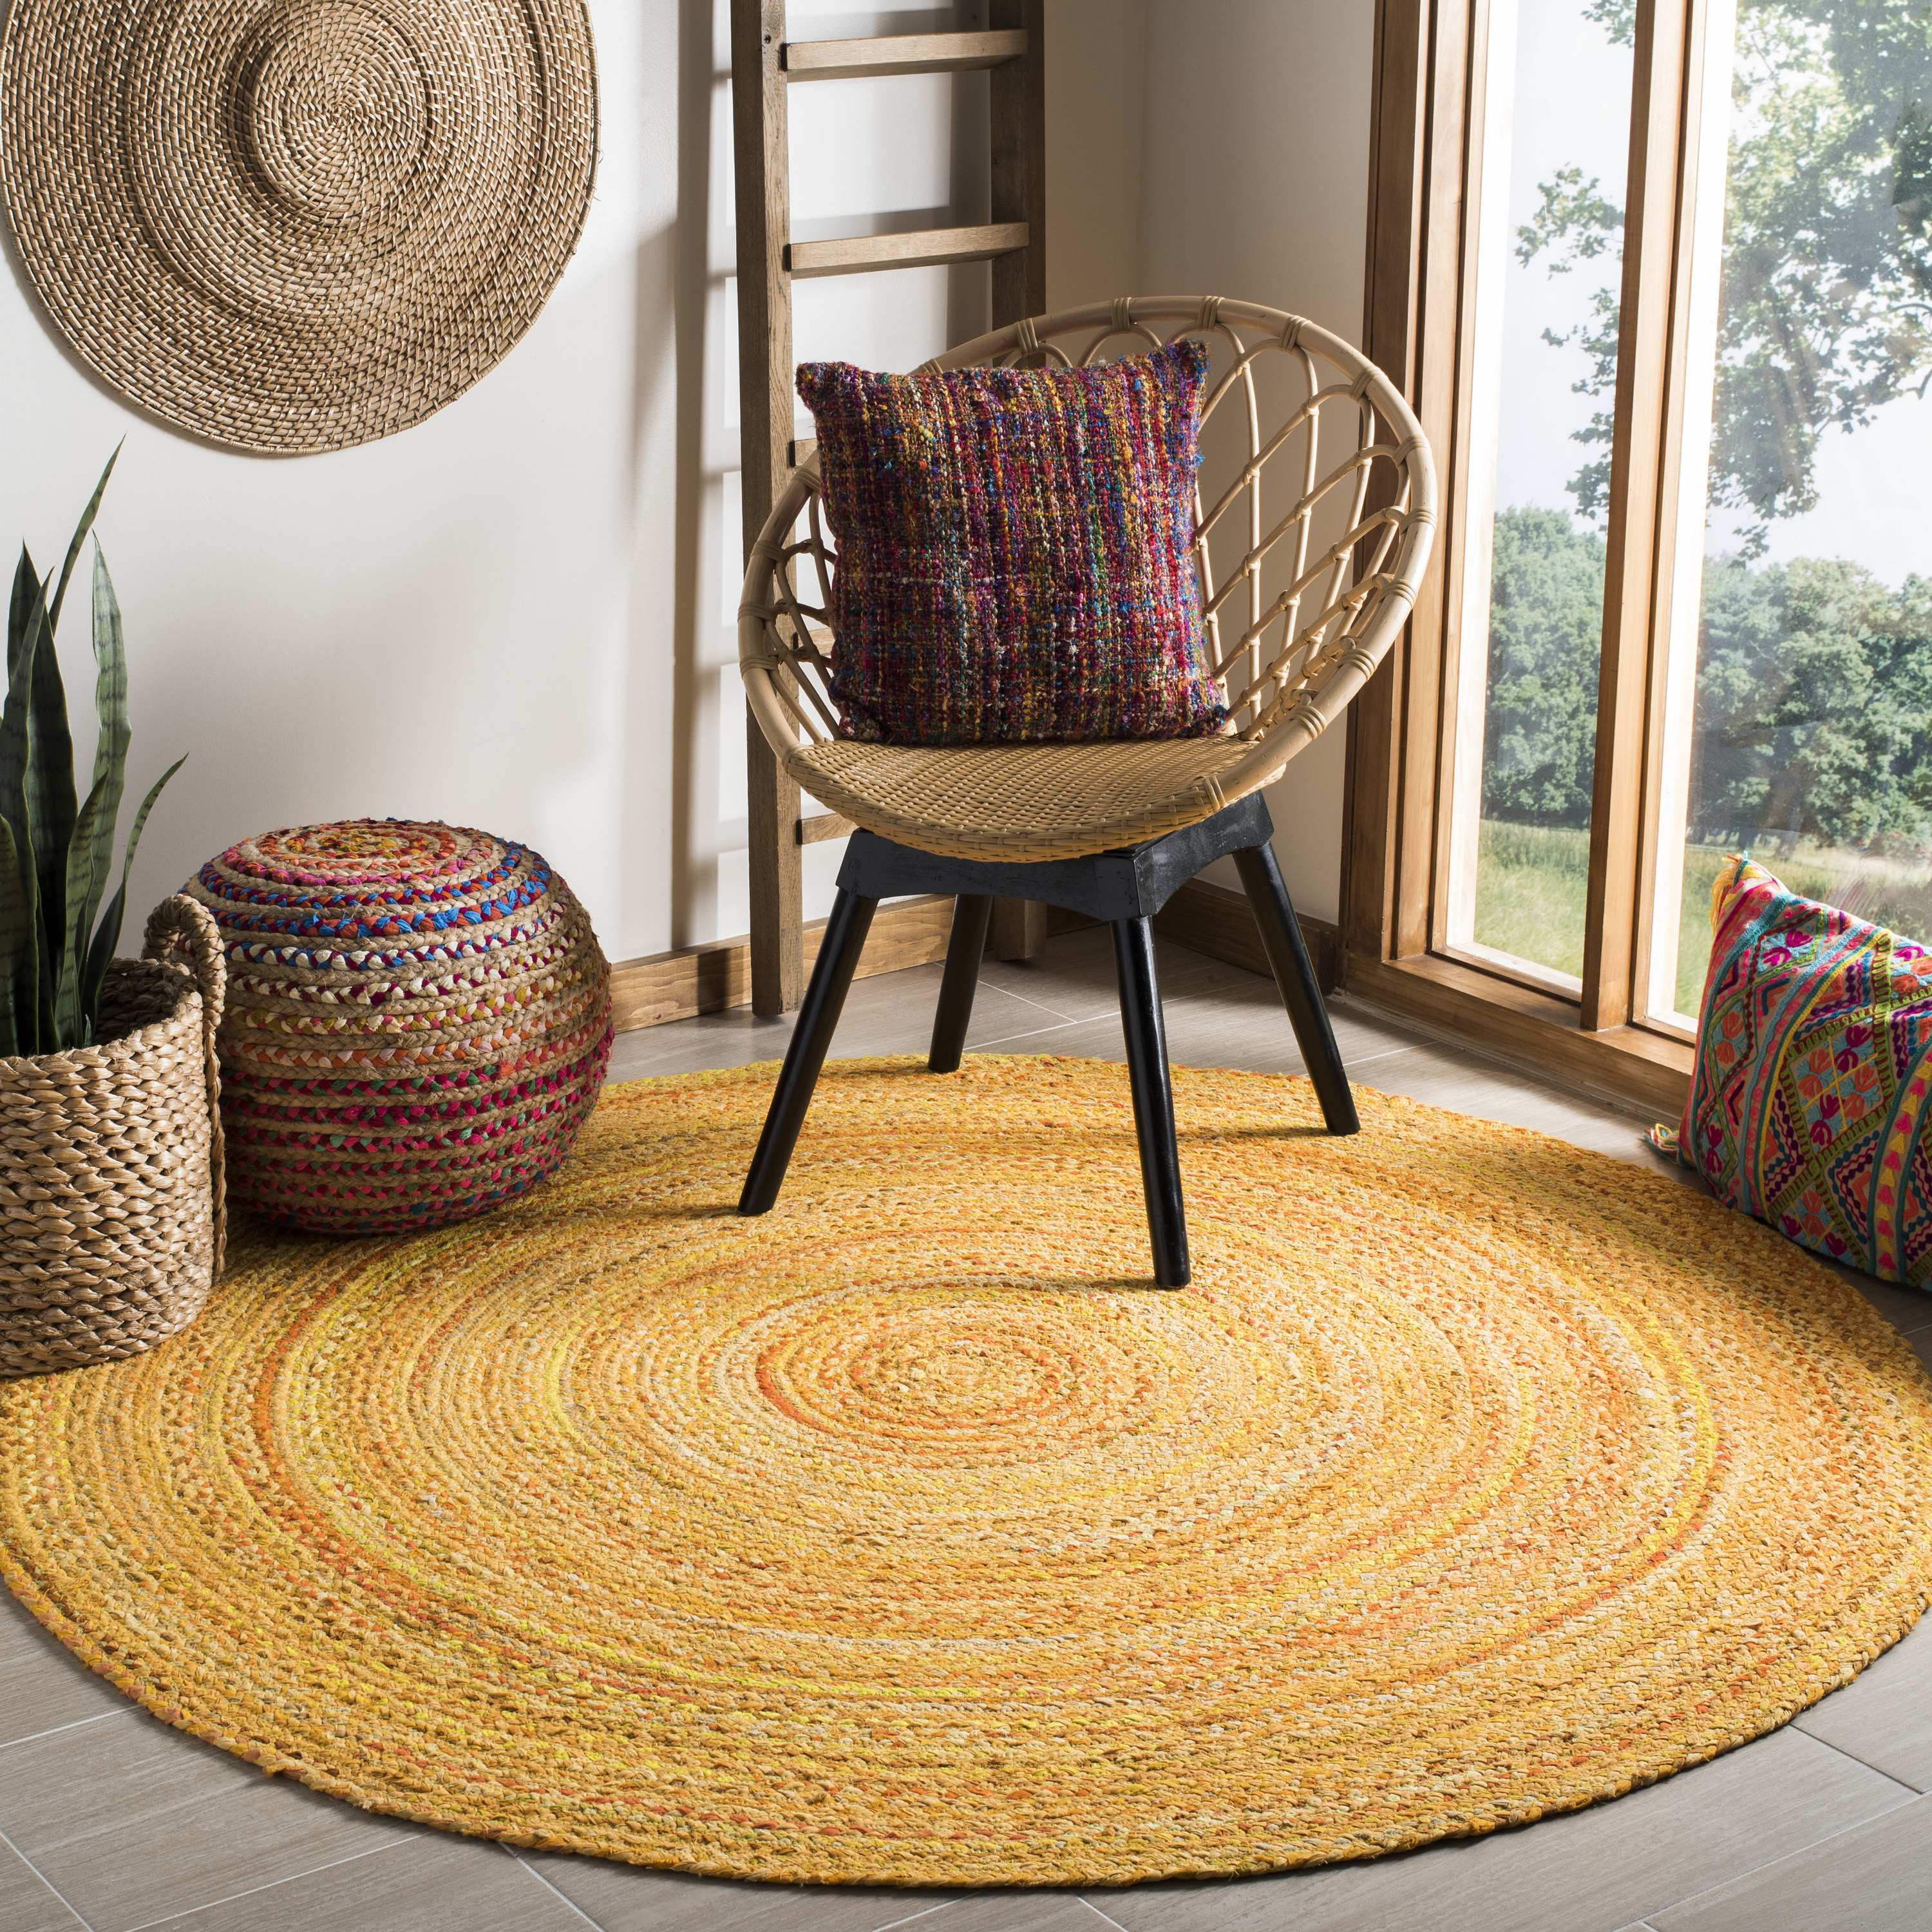 An image of a round braided area rug in a gold color